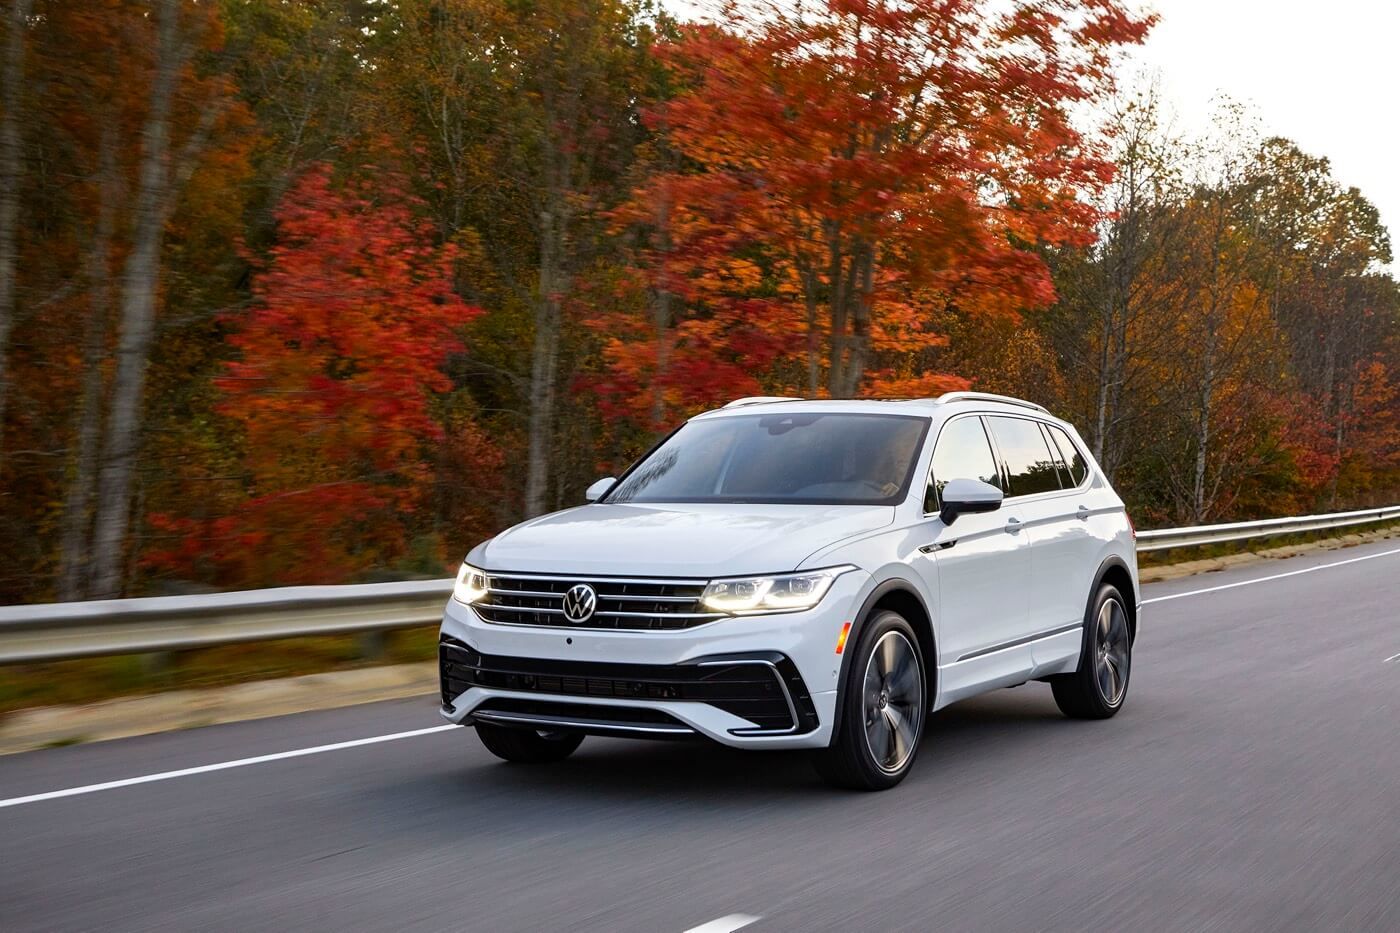 lateral front view of the 2022 Volkswagen Tiguan